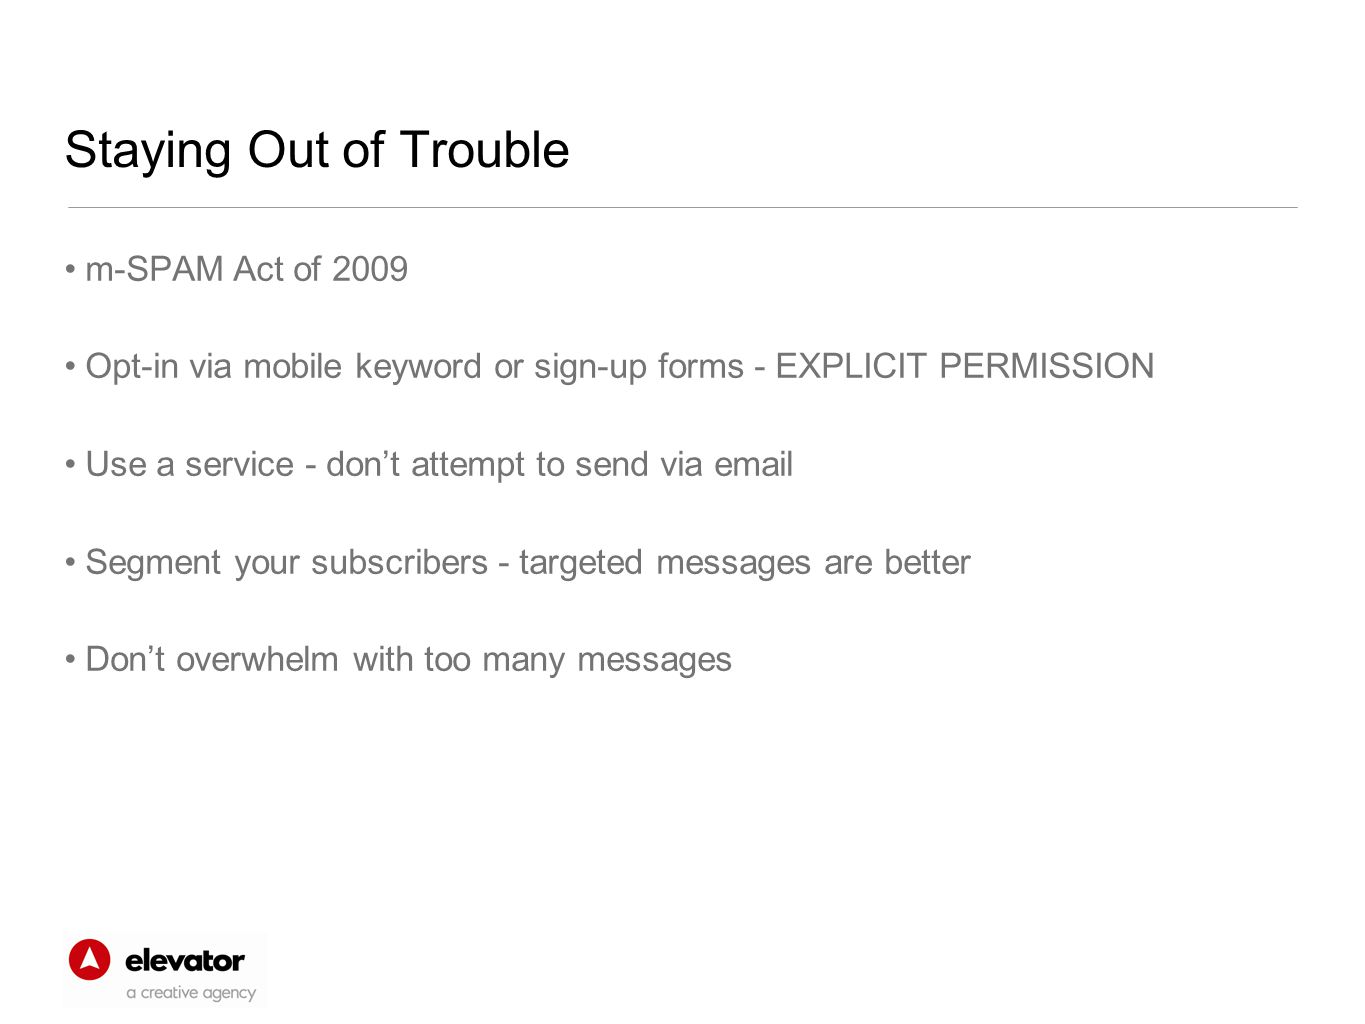 Staying Out of Trouble m-SPAM Act of 2009 Opt-in via mobile keyword or sign-up forms - EXPLICIT PERMISSION Use a service - don’t attempt to send via  Segment your subscribers - targeted messages are better Don’t overwhelm with too many messages